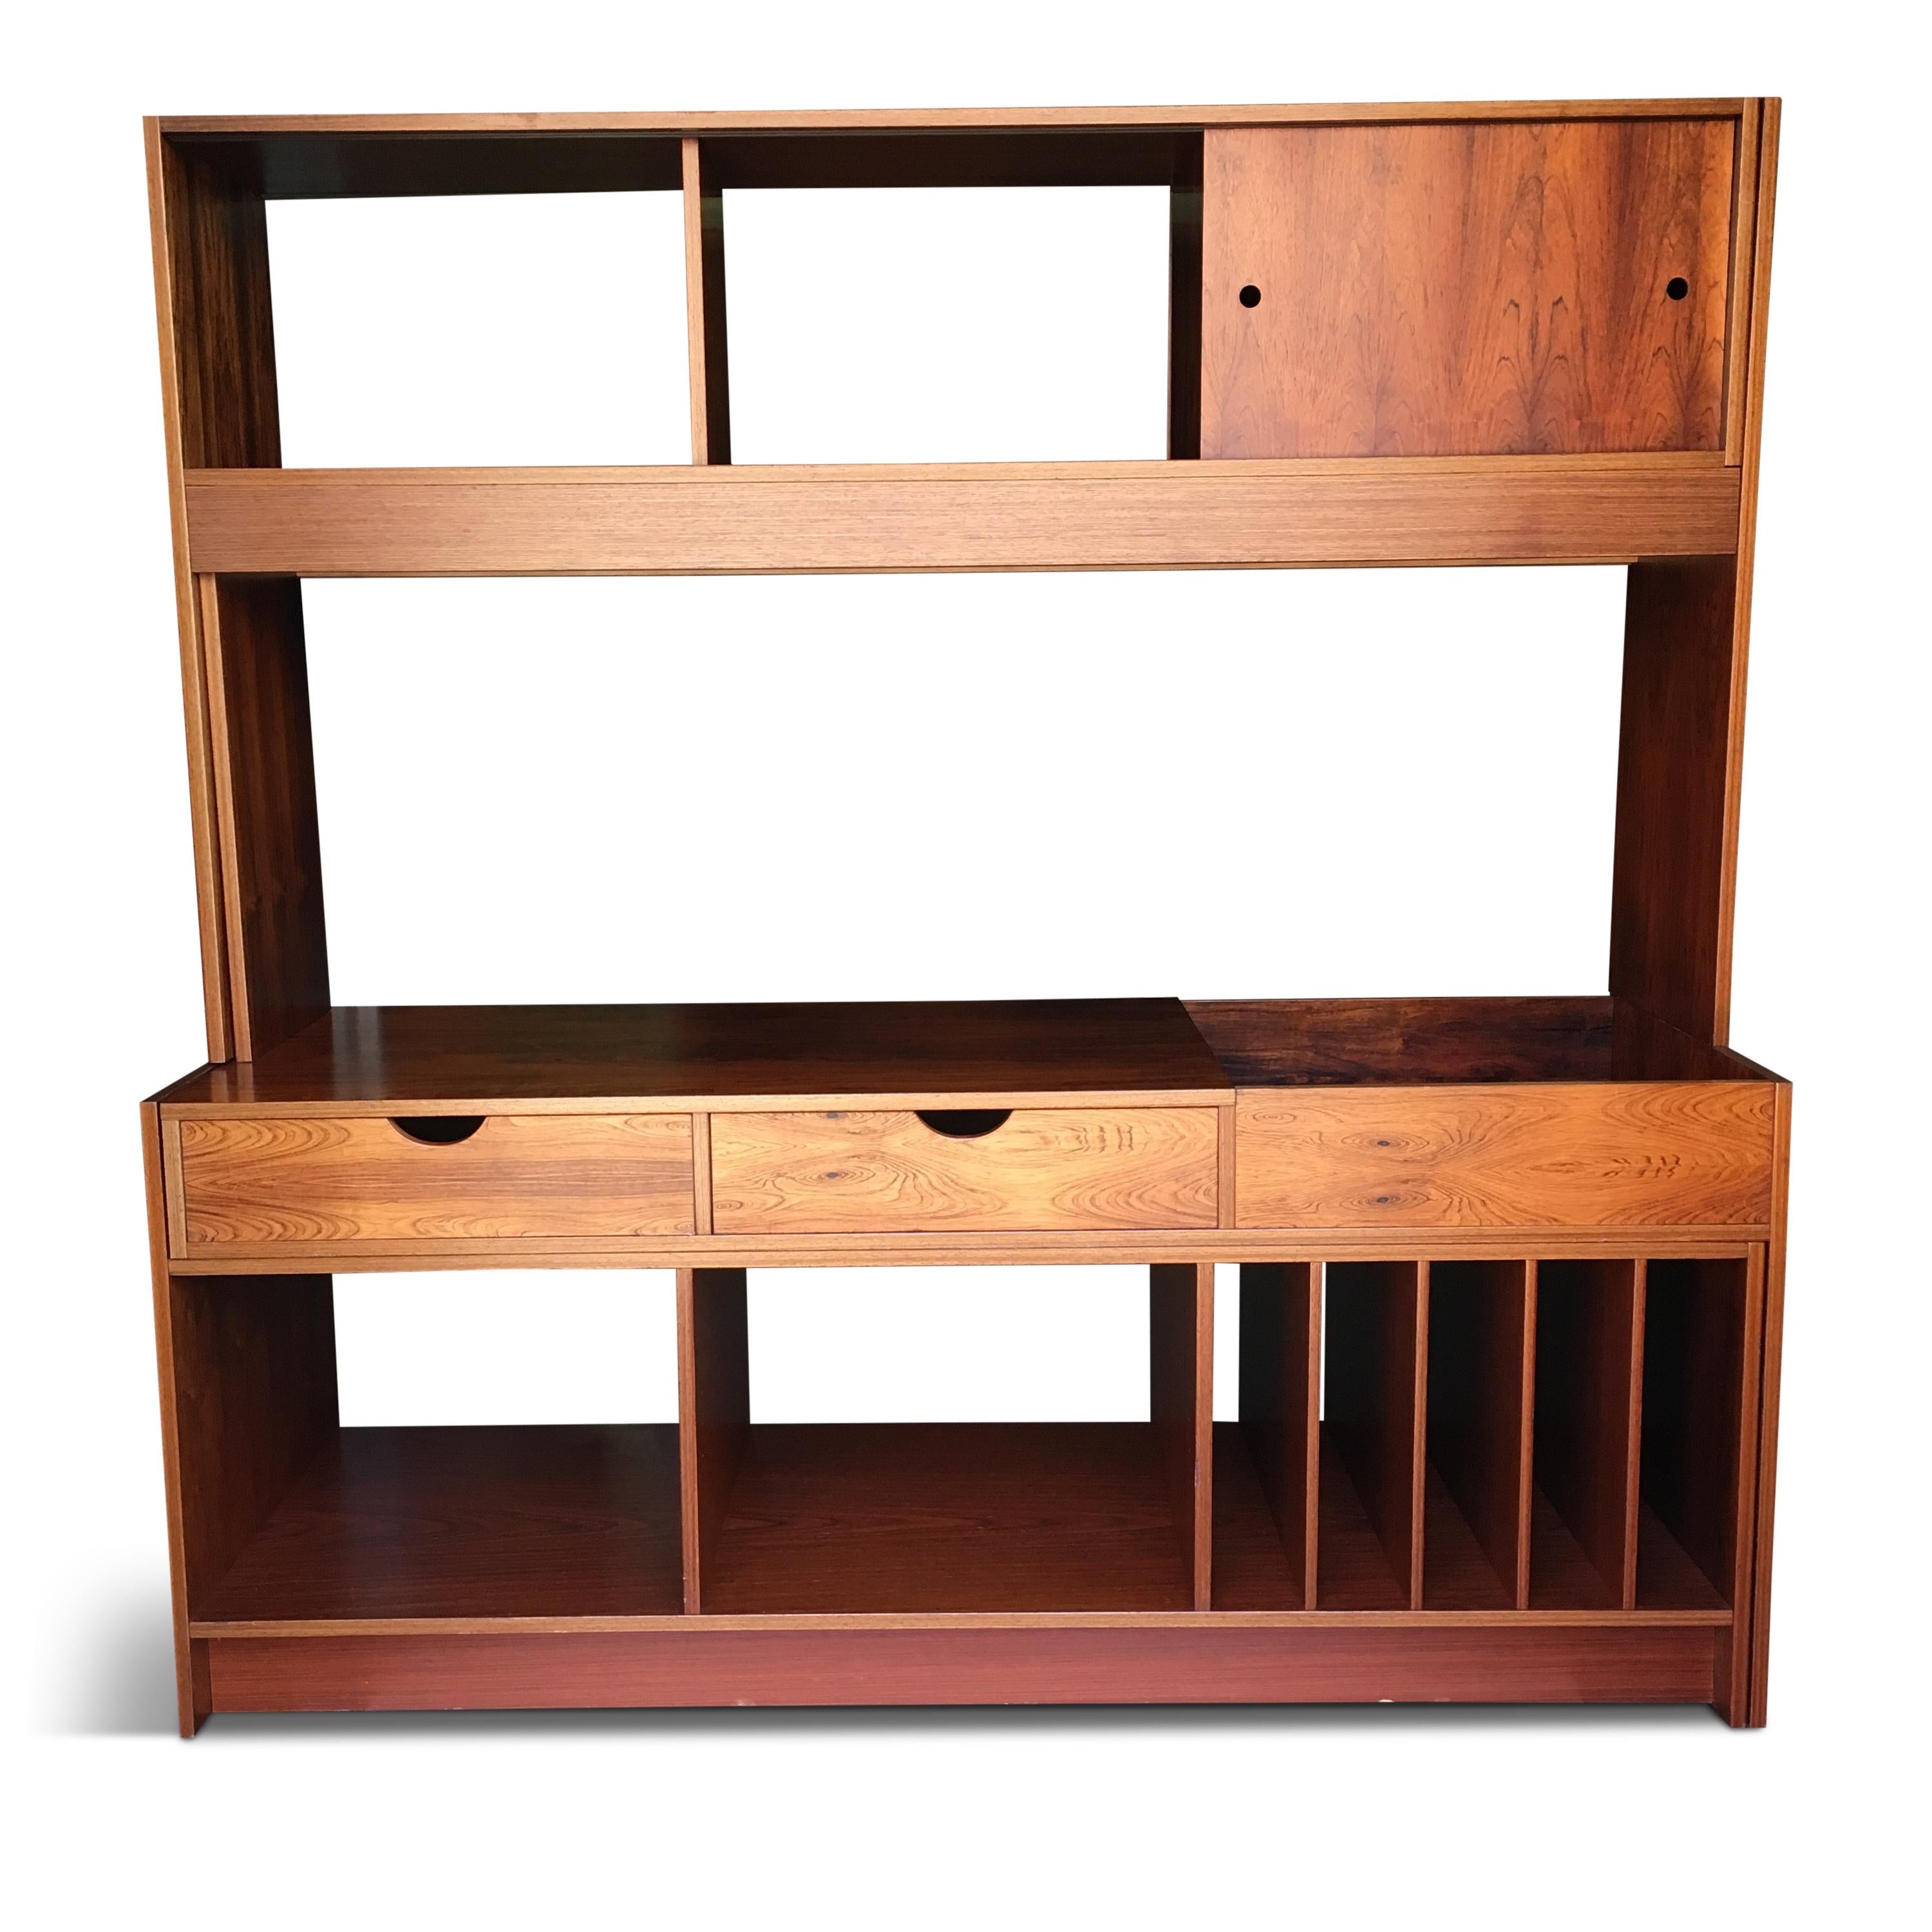 This console consists of four separate parts, placed on each other. Can be exposed both sides.

Measures: H 151 cm/H 61 cm (with no shelf)
D 50 cm
W 150 cm.